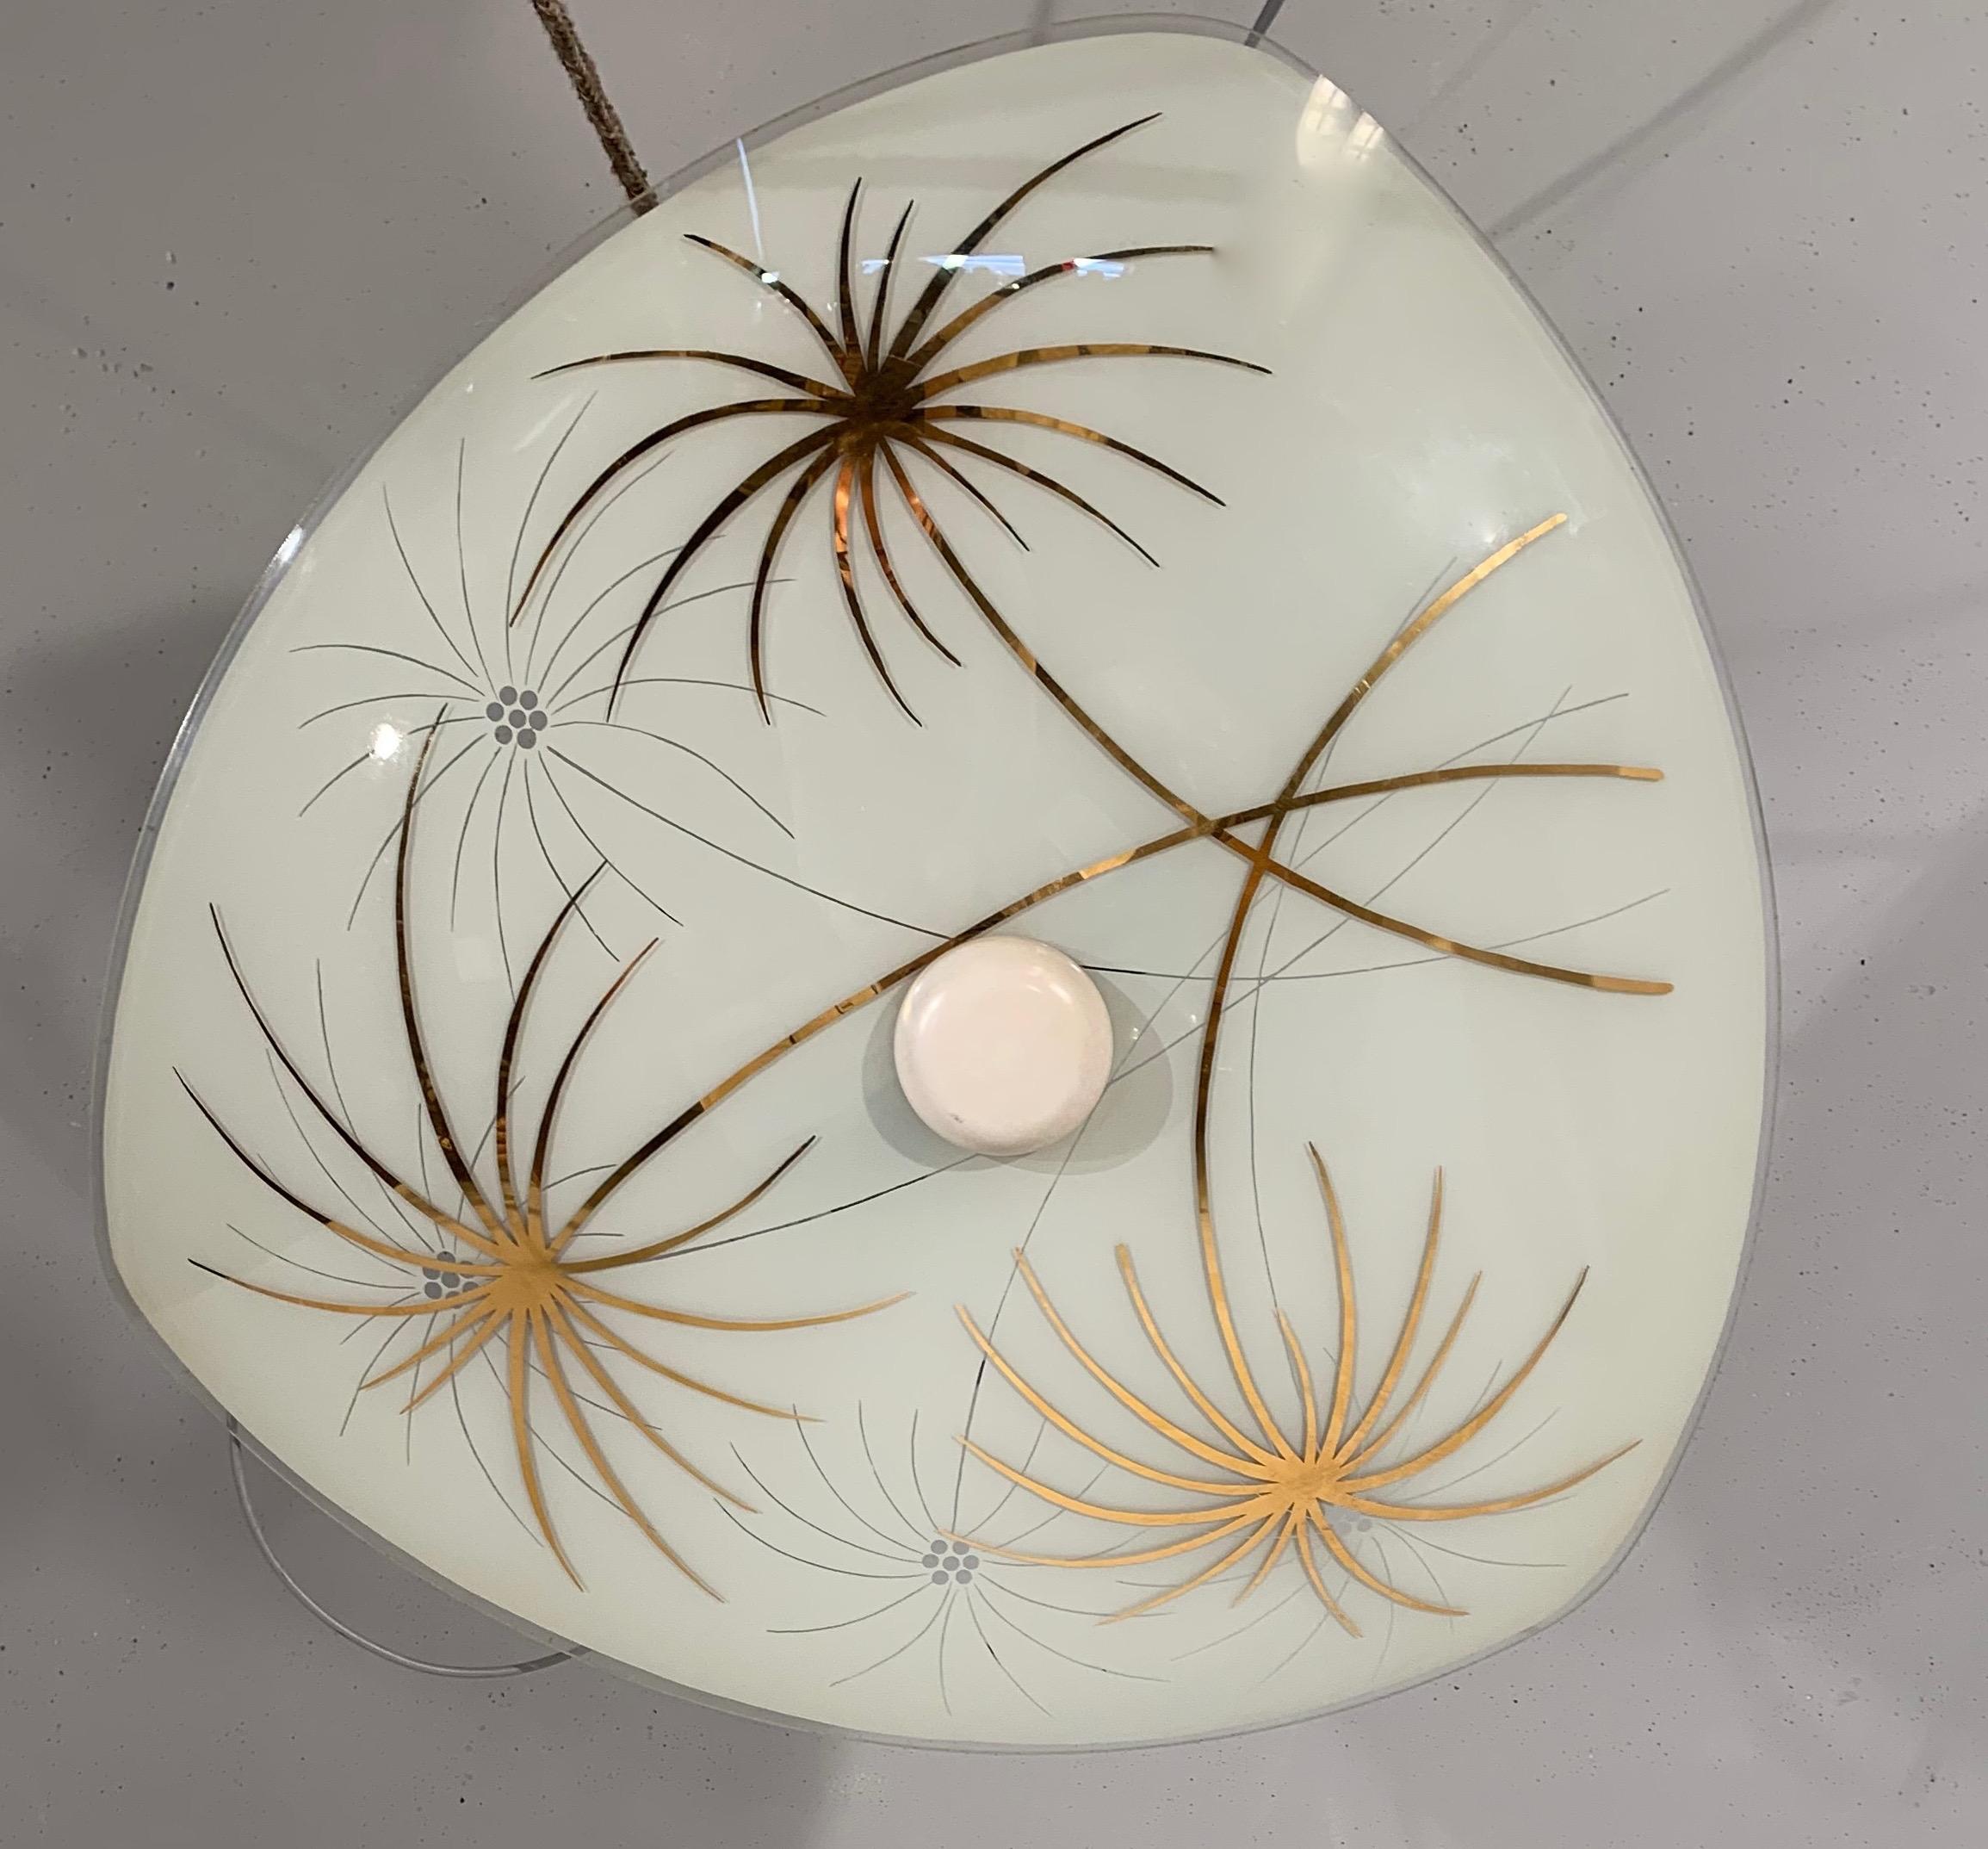 Beautifully decorated and colorful light fixture from the midcentury era.

This Mid-Century Modern work of (lighting) art is another one of our recent, wonderful finds. As you can see, the sleek and almost flat glass shade comes with a stylish,